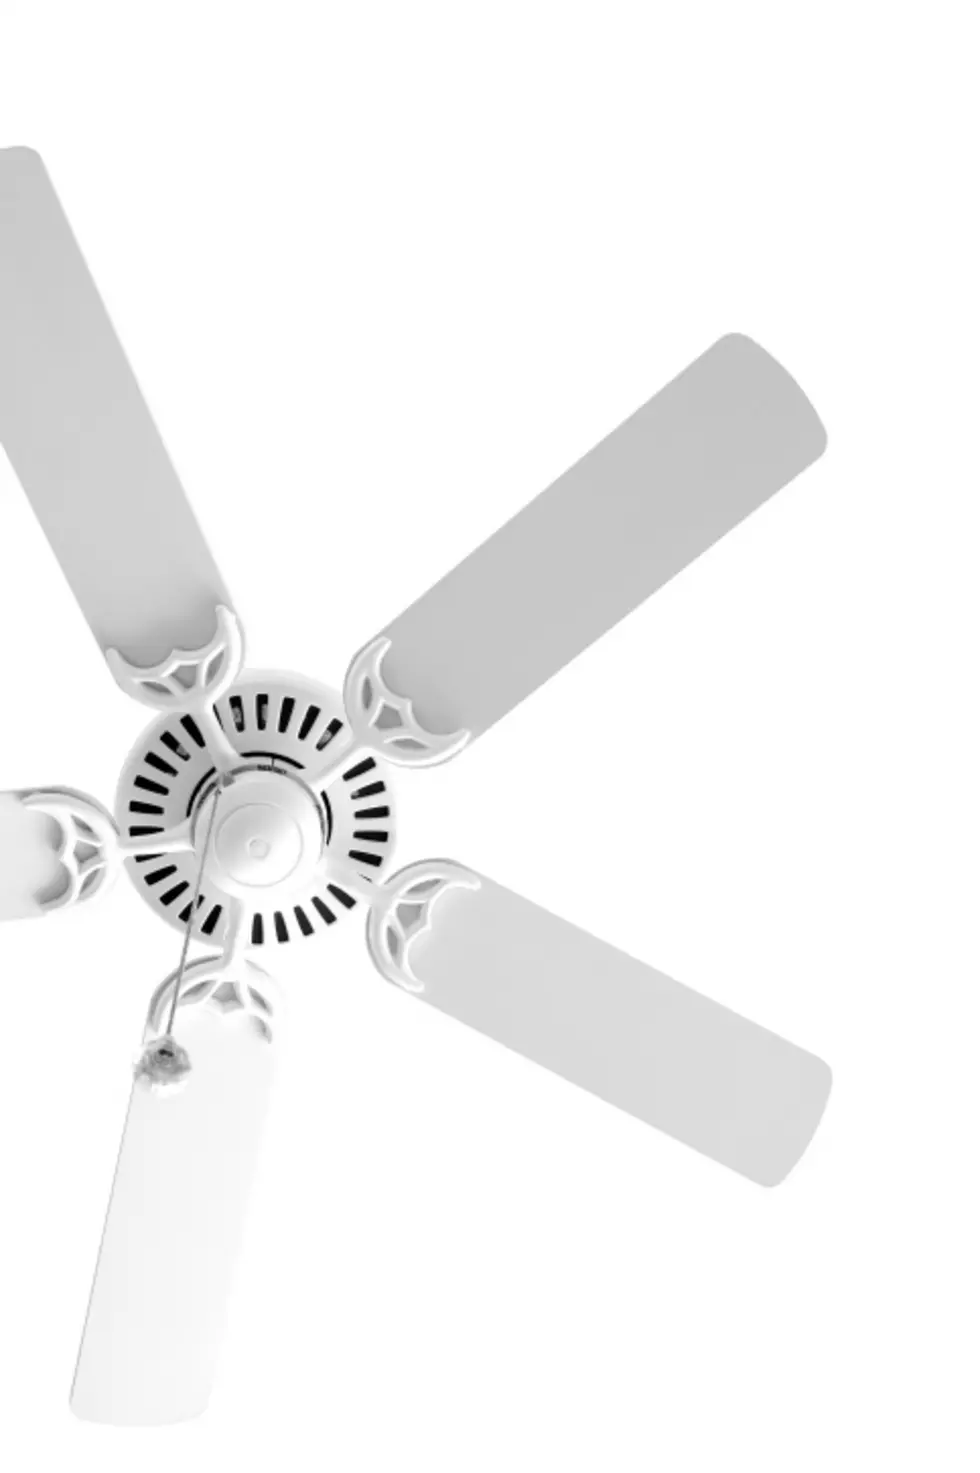 Did You Know Your Ceiling Fan Has Winter and Summer Settings?